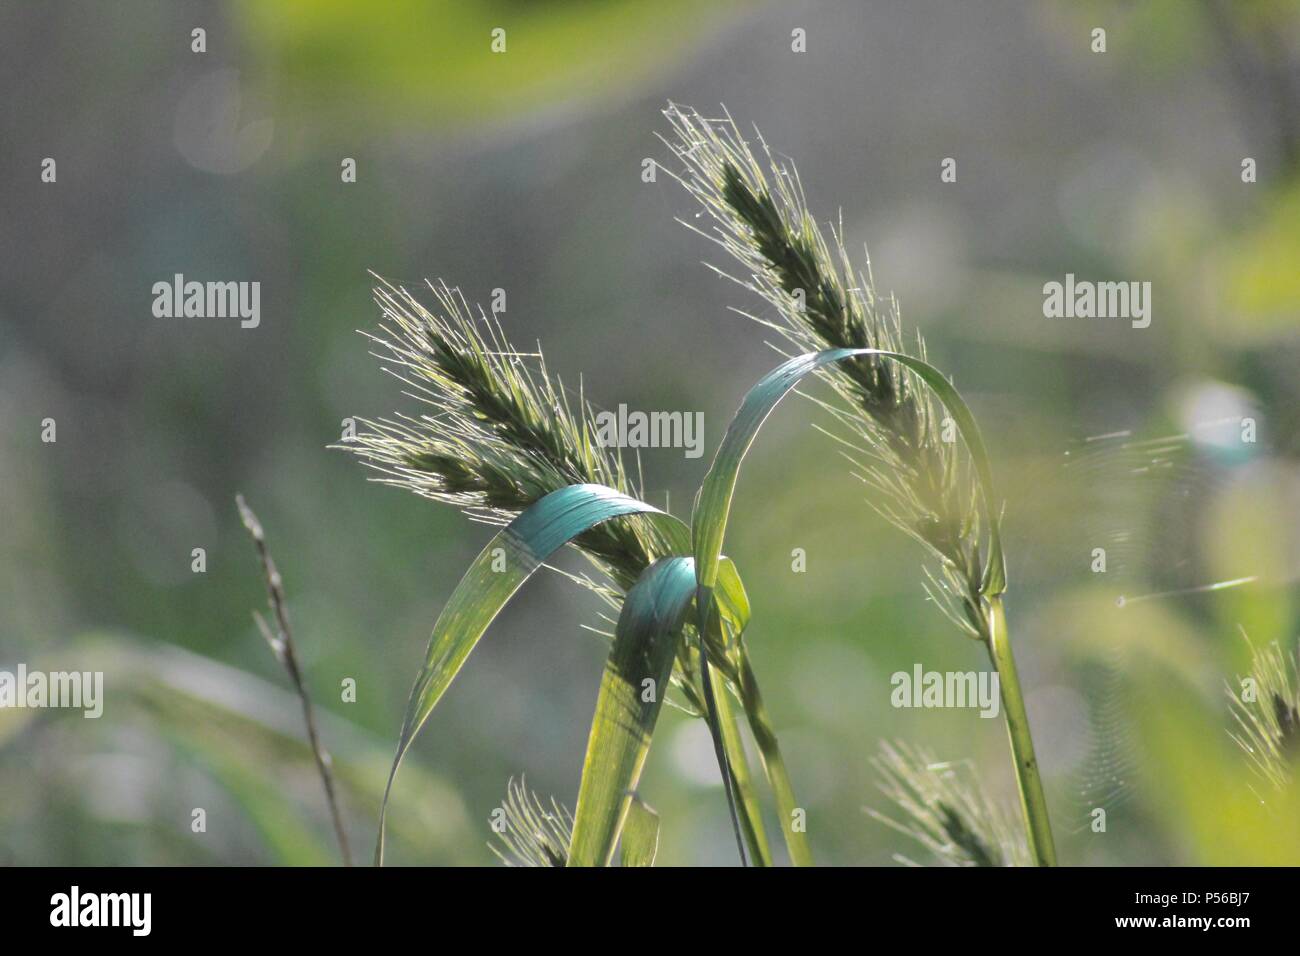 Heads of wheat against green background Stock Photo